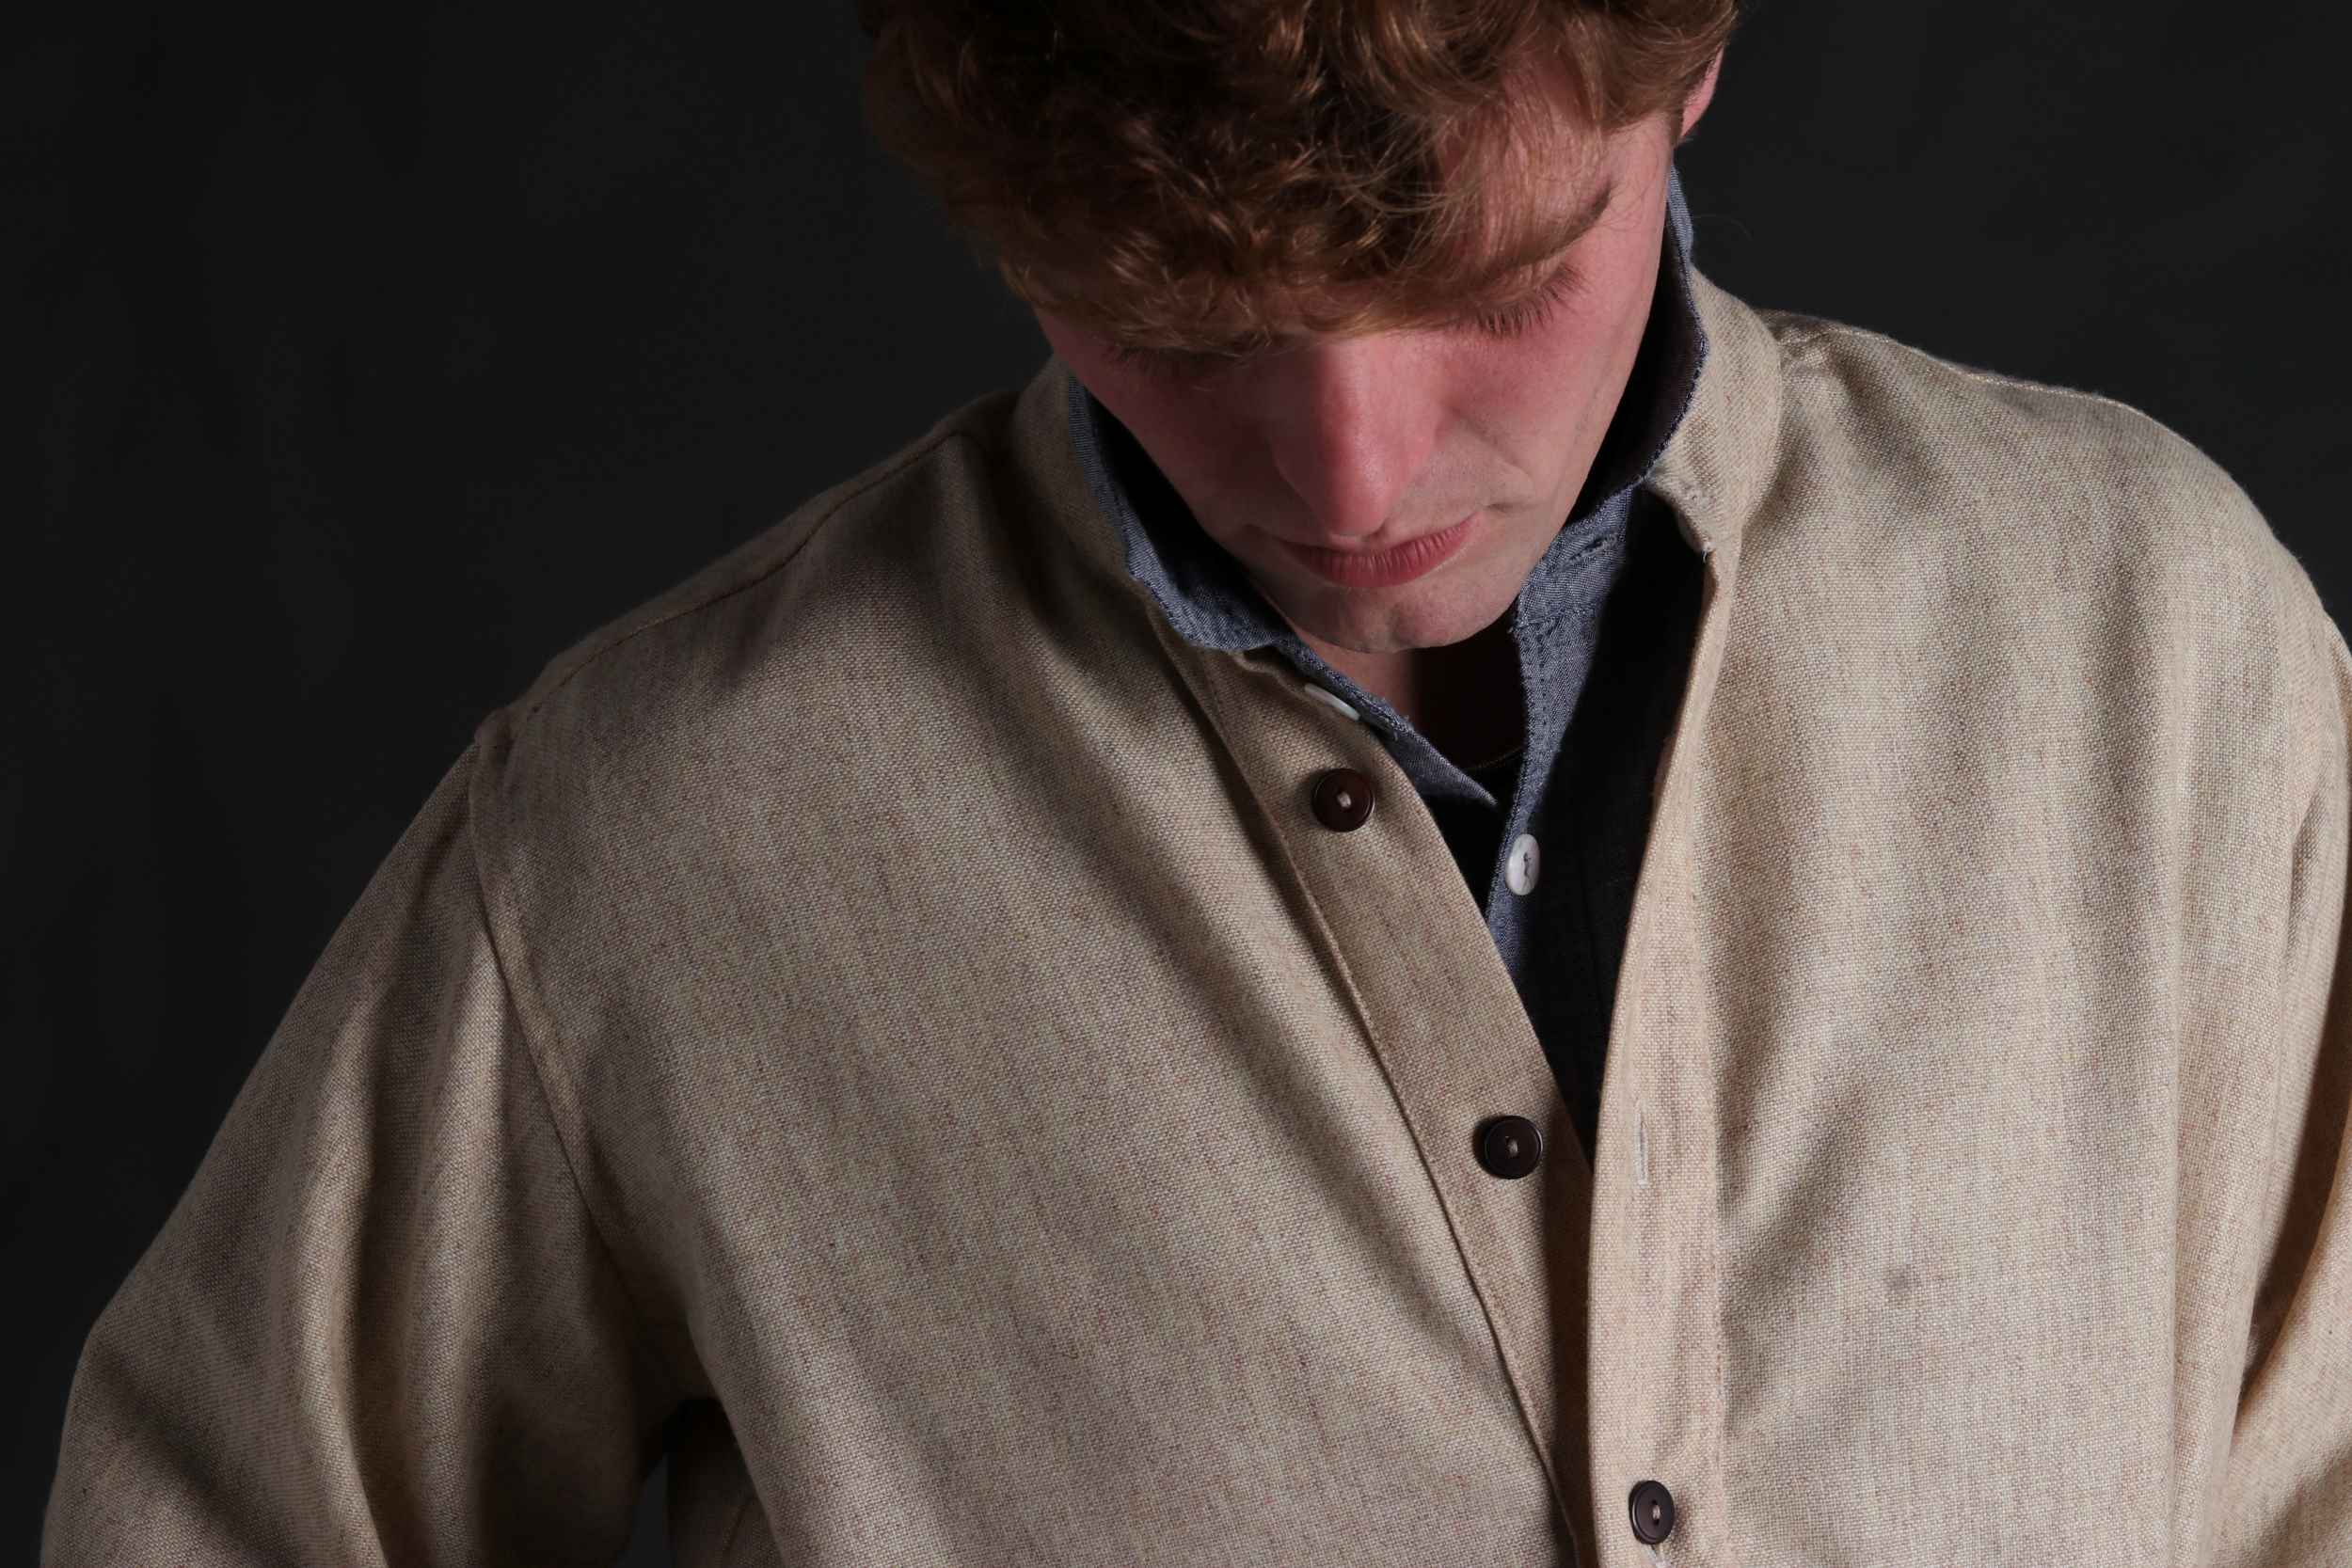 Man wears Carrier Company Wool Overshirt in Barleystraw with Chambray Shirt underneath